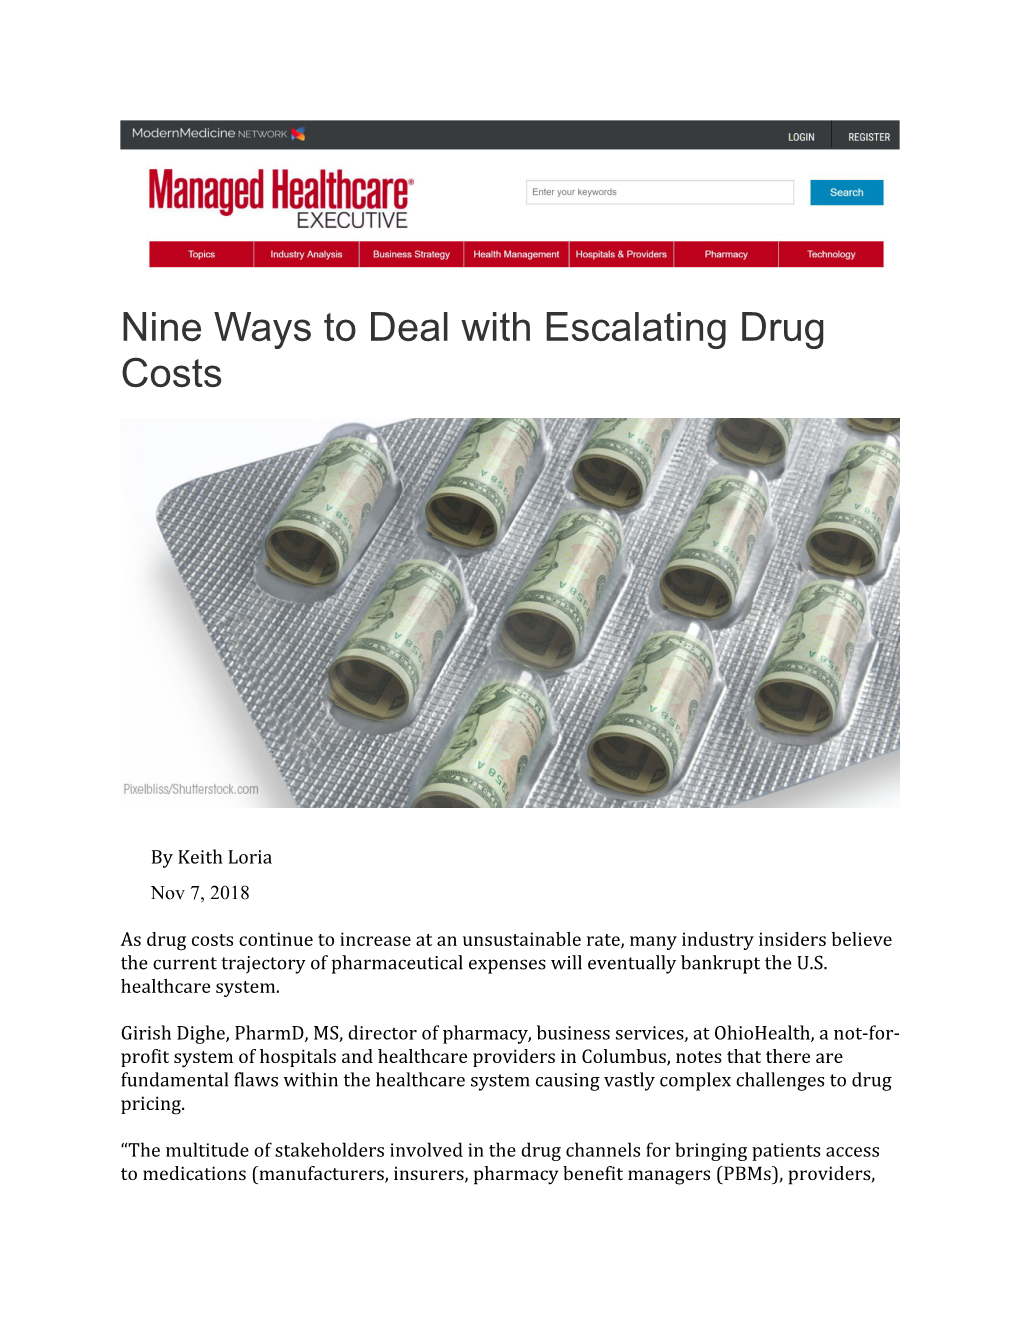 Nine Ways to Deal with Escalating Drug Costs